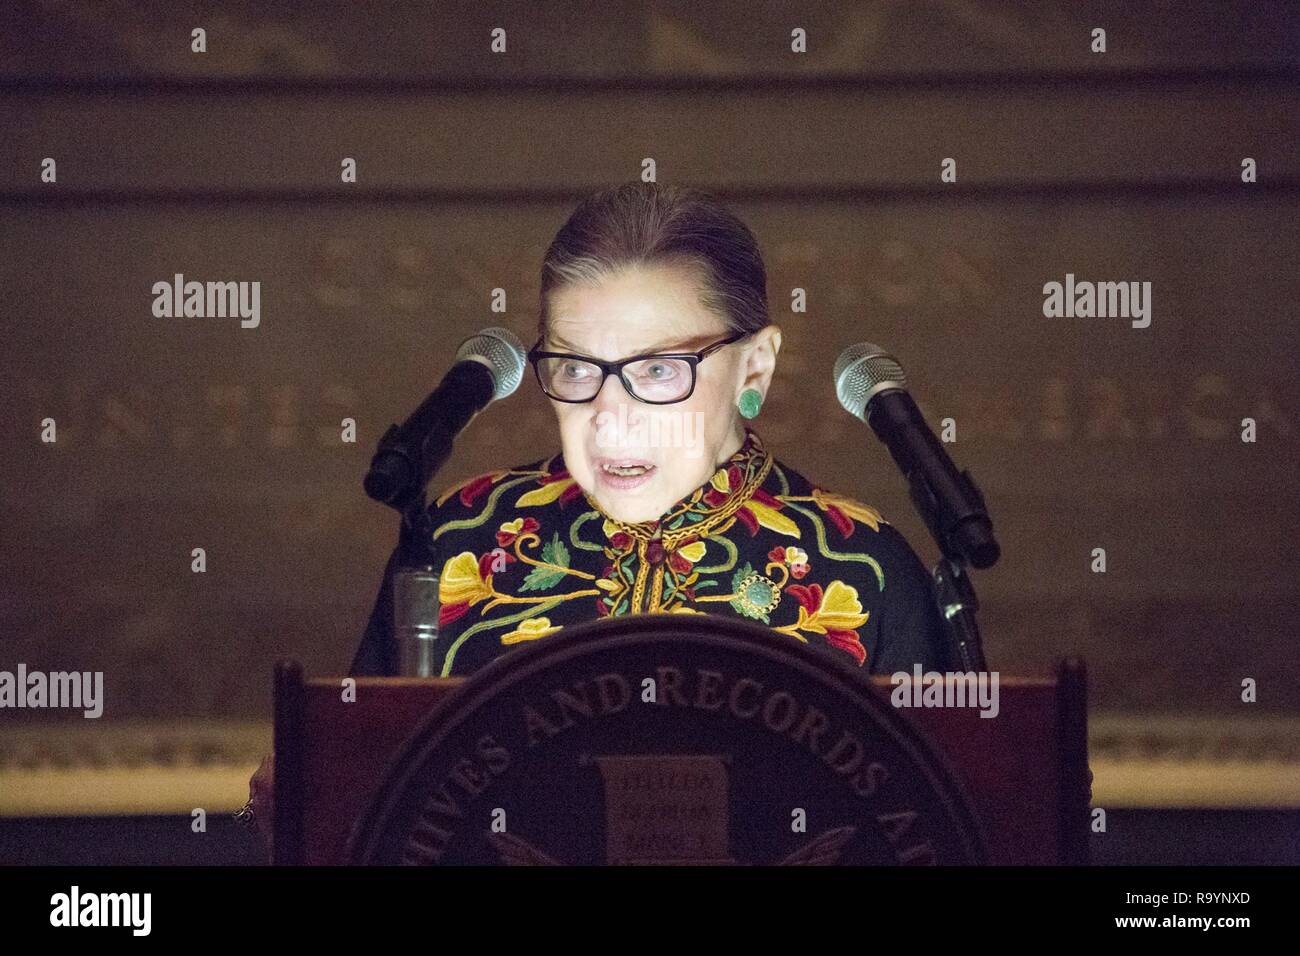 U.S Supreme Court Justice Ruth Bader Ginsburg speaks during an immigration Naturalization Ceremony on Bill of Rights Day at the National Archives December 14, 2018 in Washington, D.C. Stock Photo